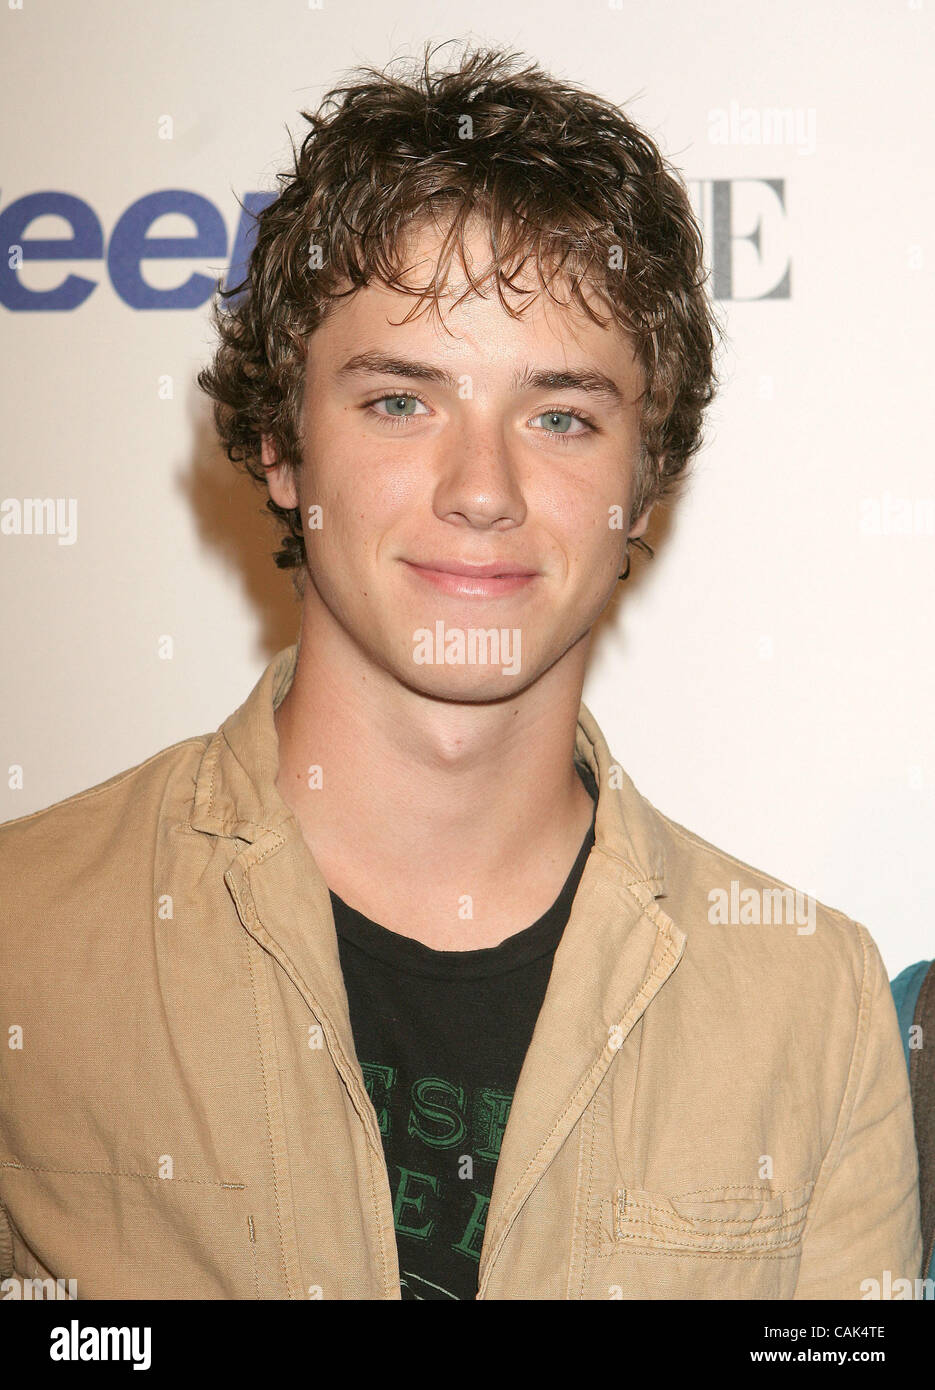 Sep 20, 2007; Hollywood, California, USA;  Actor JEREMY SUMPTER at the  Vogue Young Hollywood Party  held at Vibiana in Los Angeles. Mandatory Credit: Photo by Paul Fenton/ZUMA Press. (©) Copyright 2007 by Paul Fenton Stock Photo